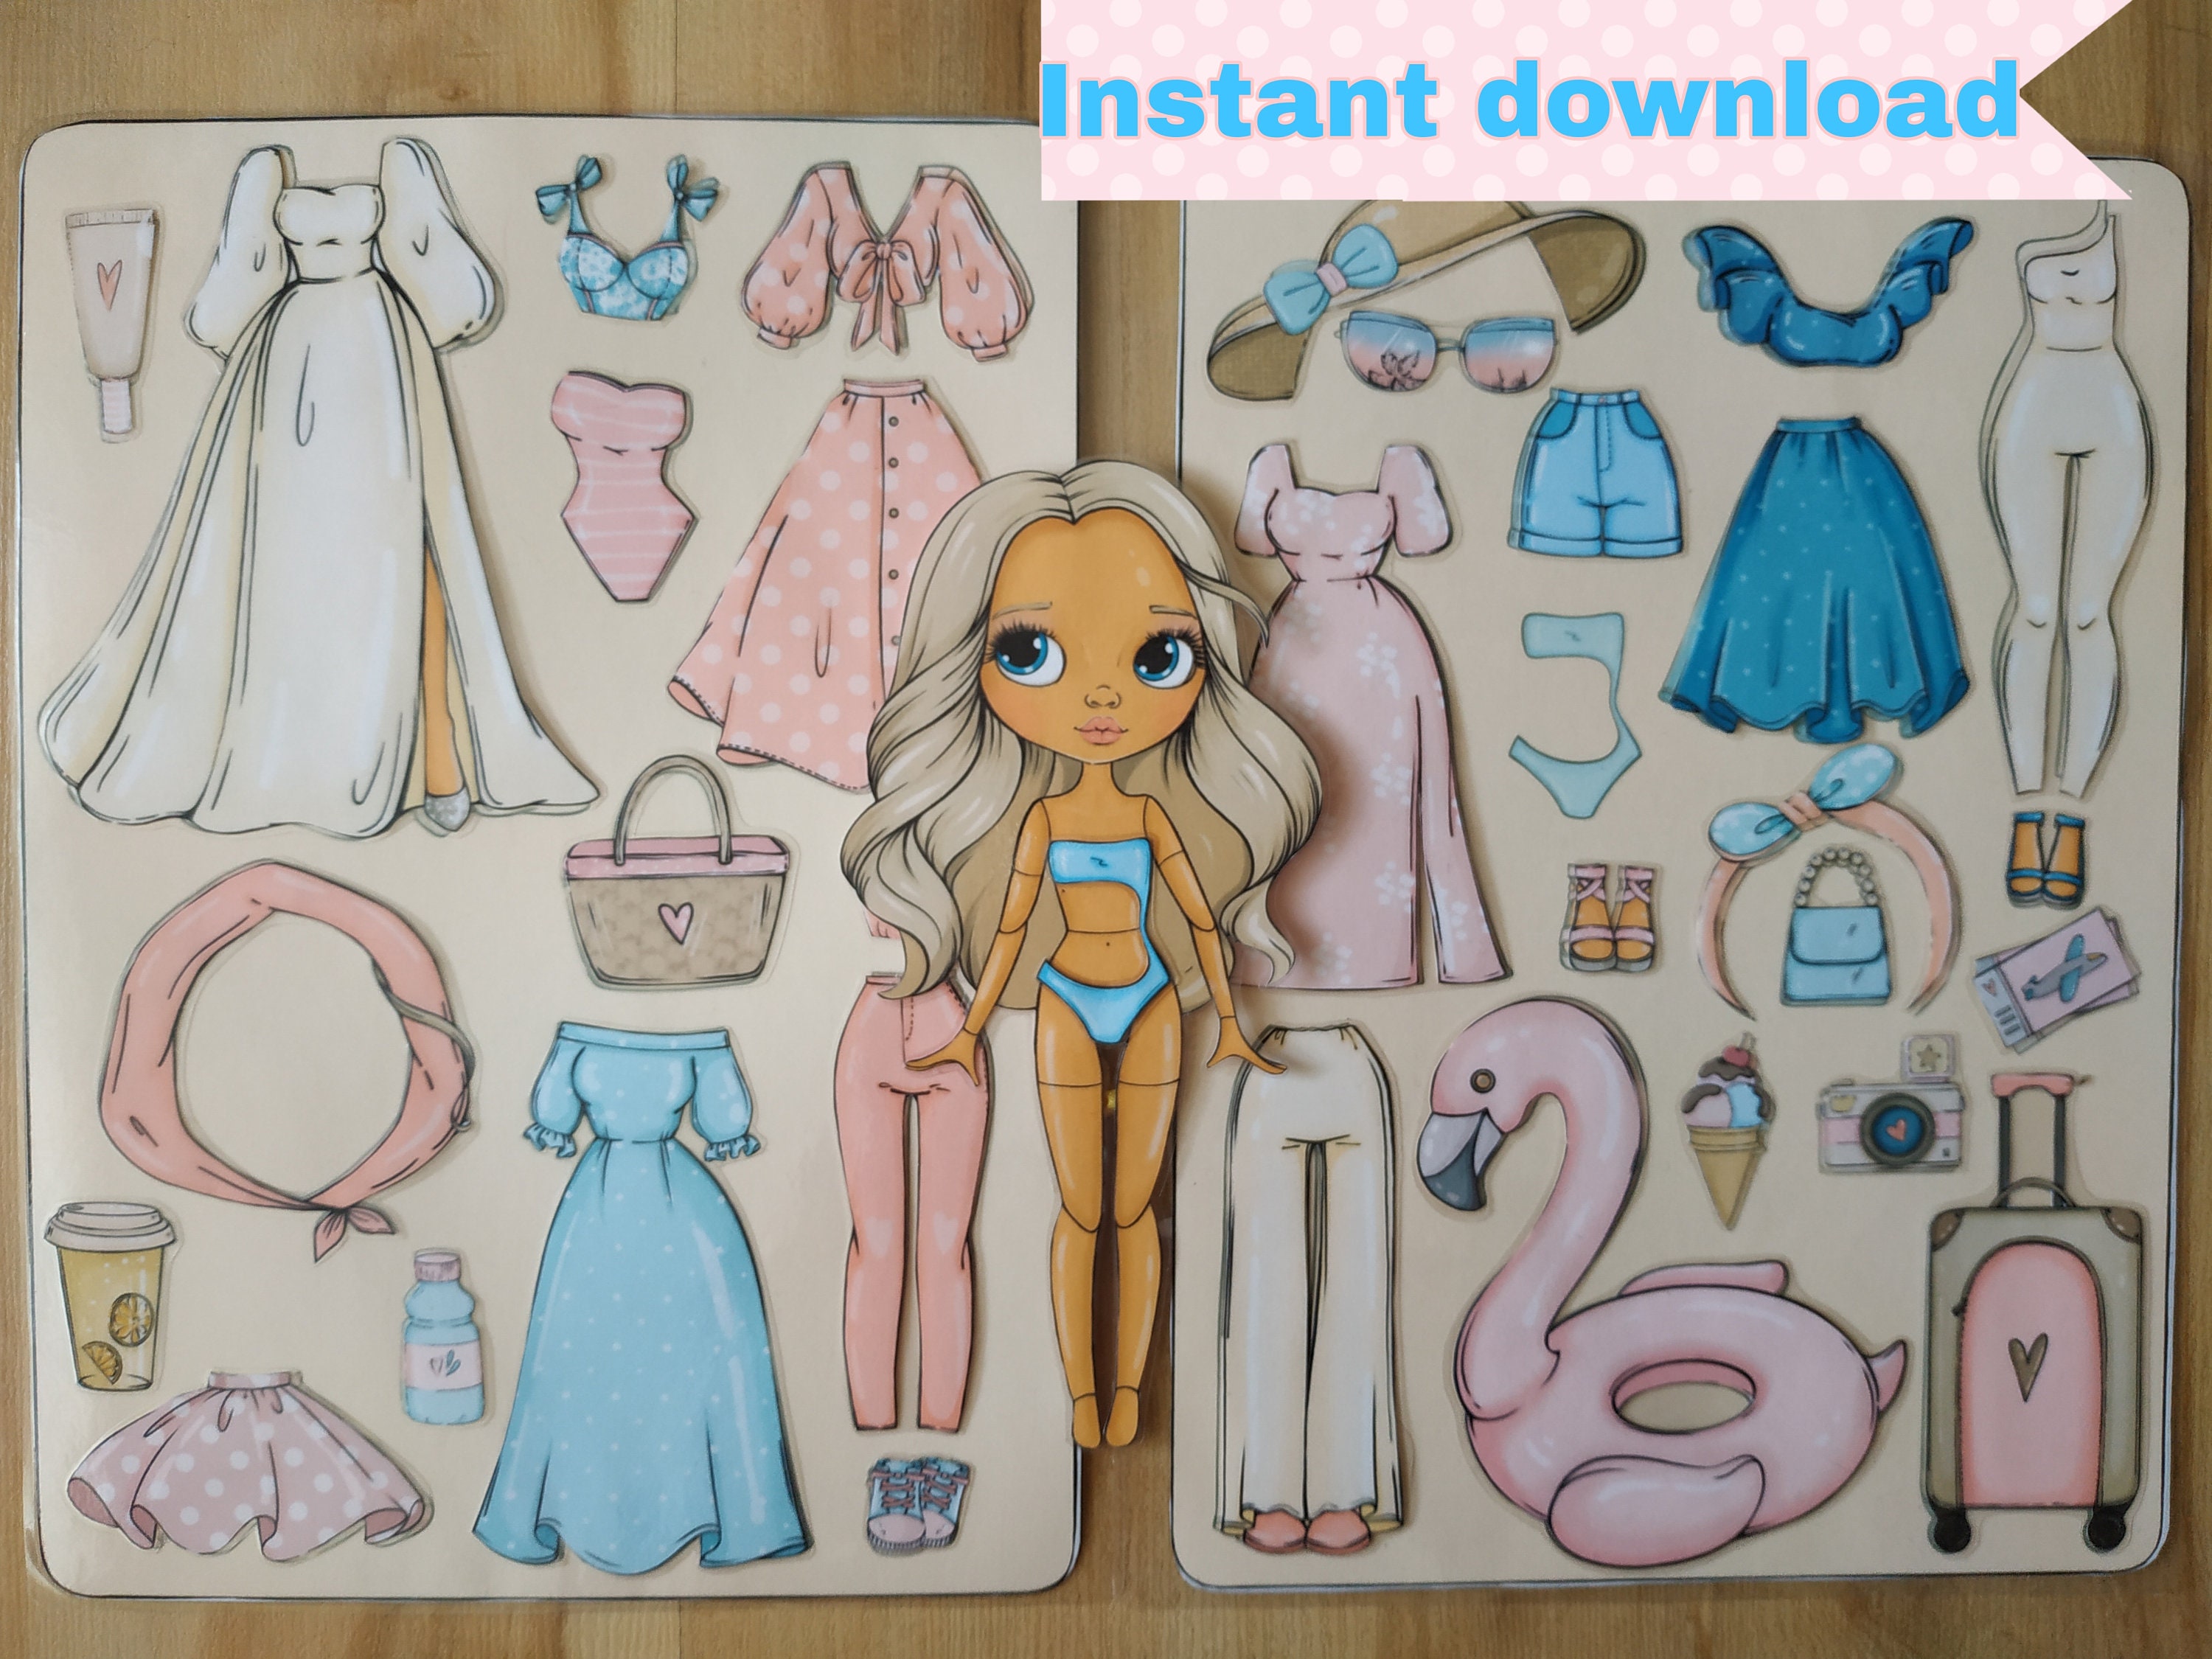 Cut Out Paper Dolls And Clothes: Fashion Activity Book for Girls, Cute Doll  Clothes With Colouring Books for Girls Ages 8-12 Version